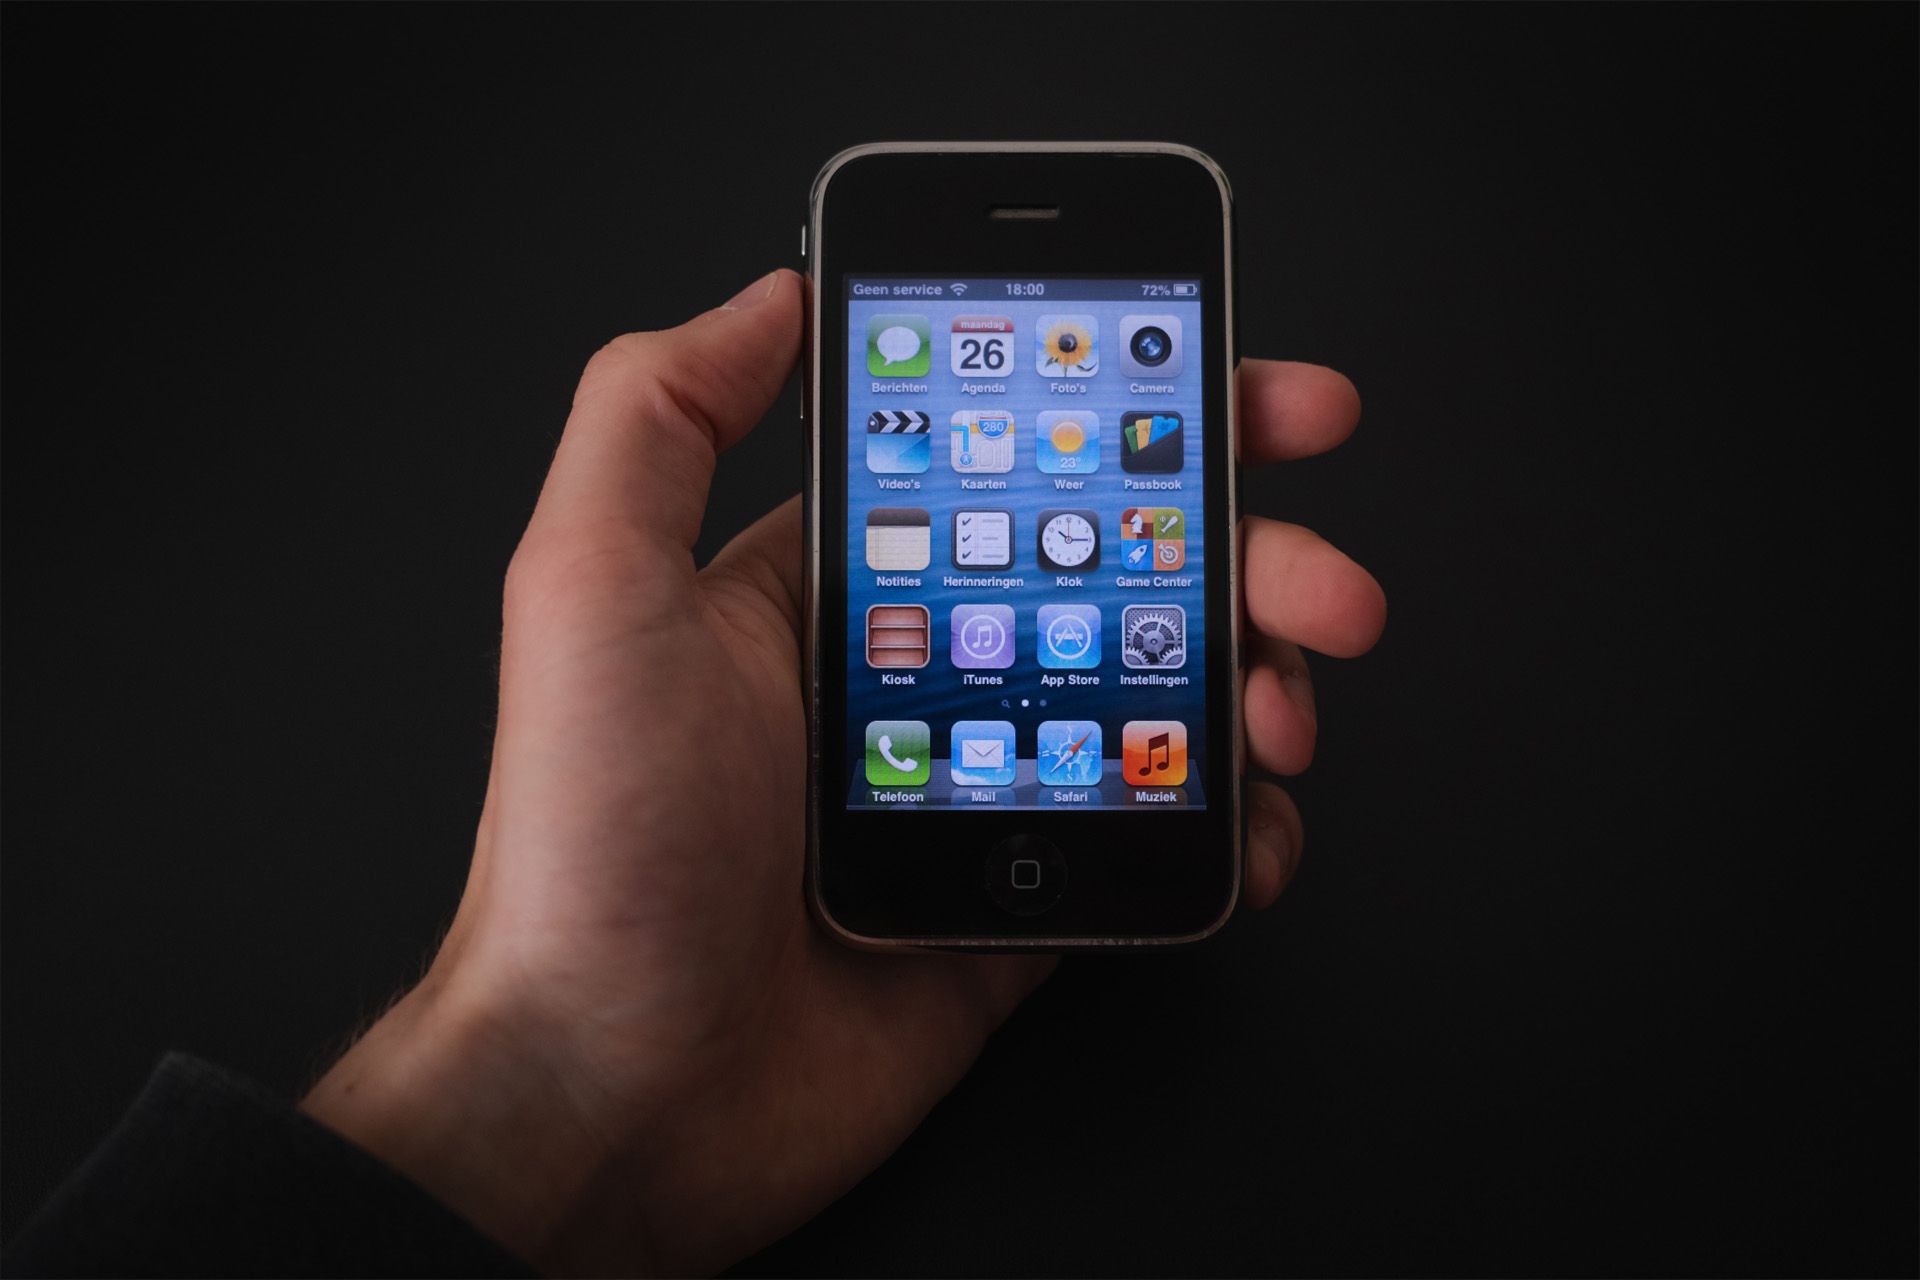 A person holding an iPhone 3GS with iOS 6 running on it.